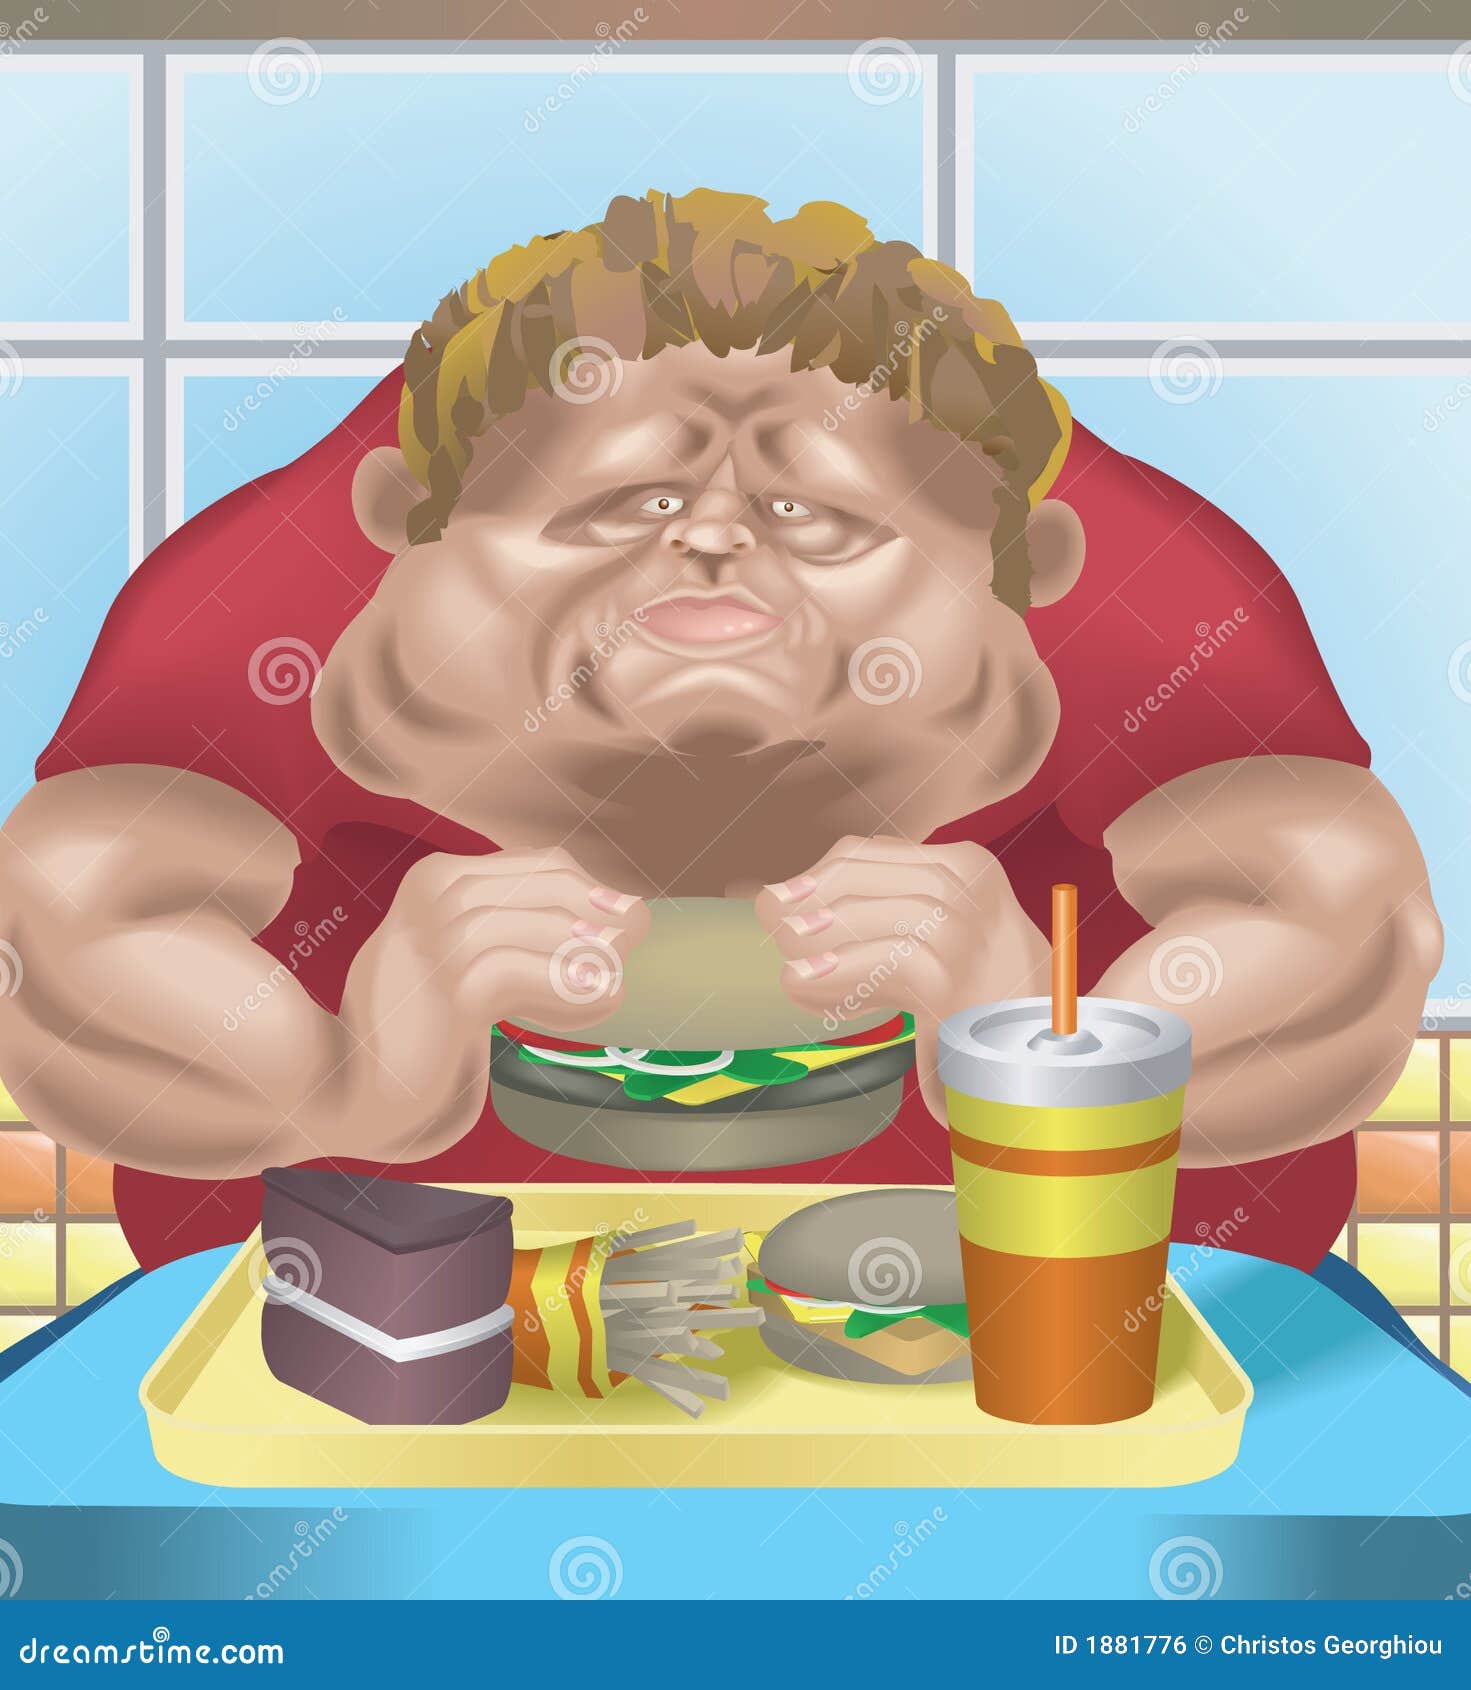 obese man in fast food restaurant